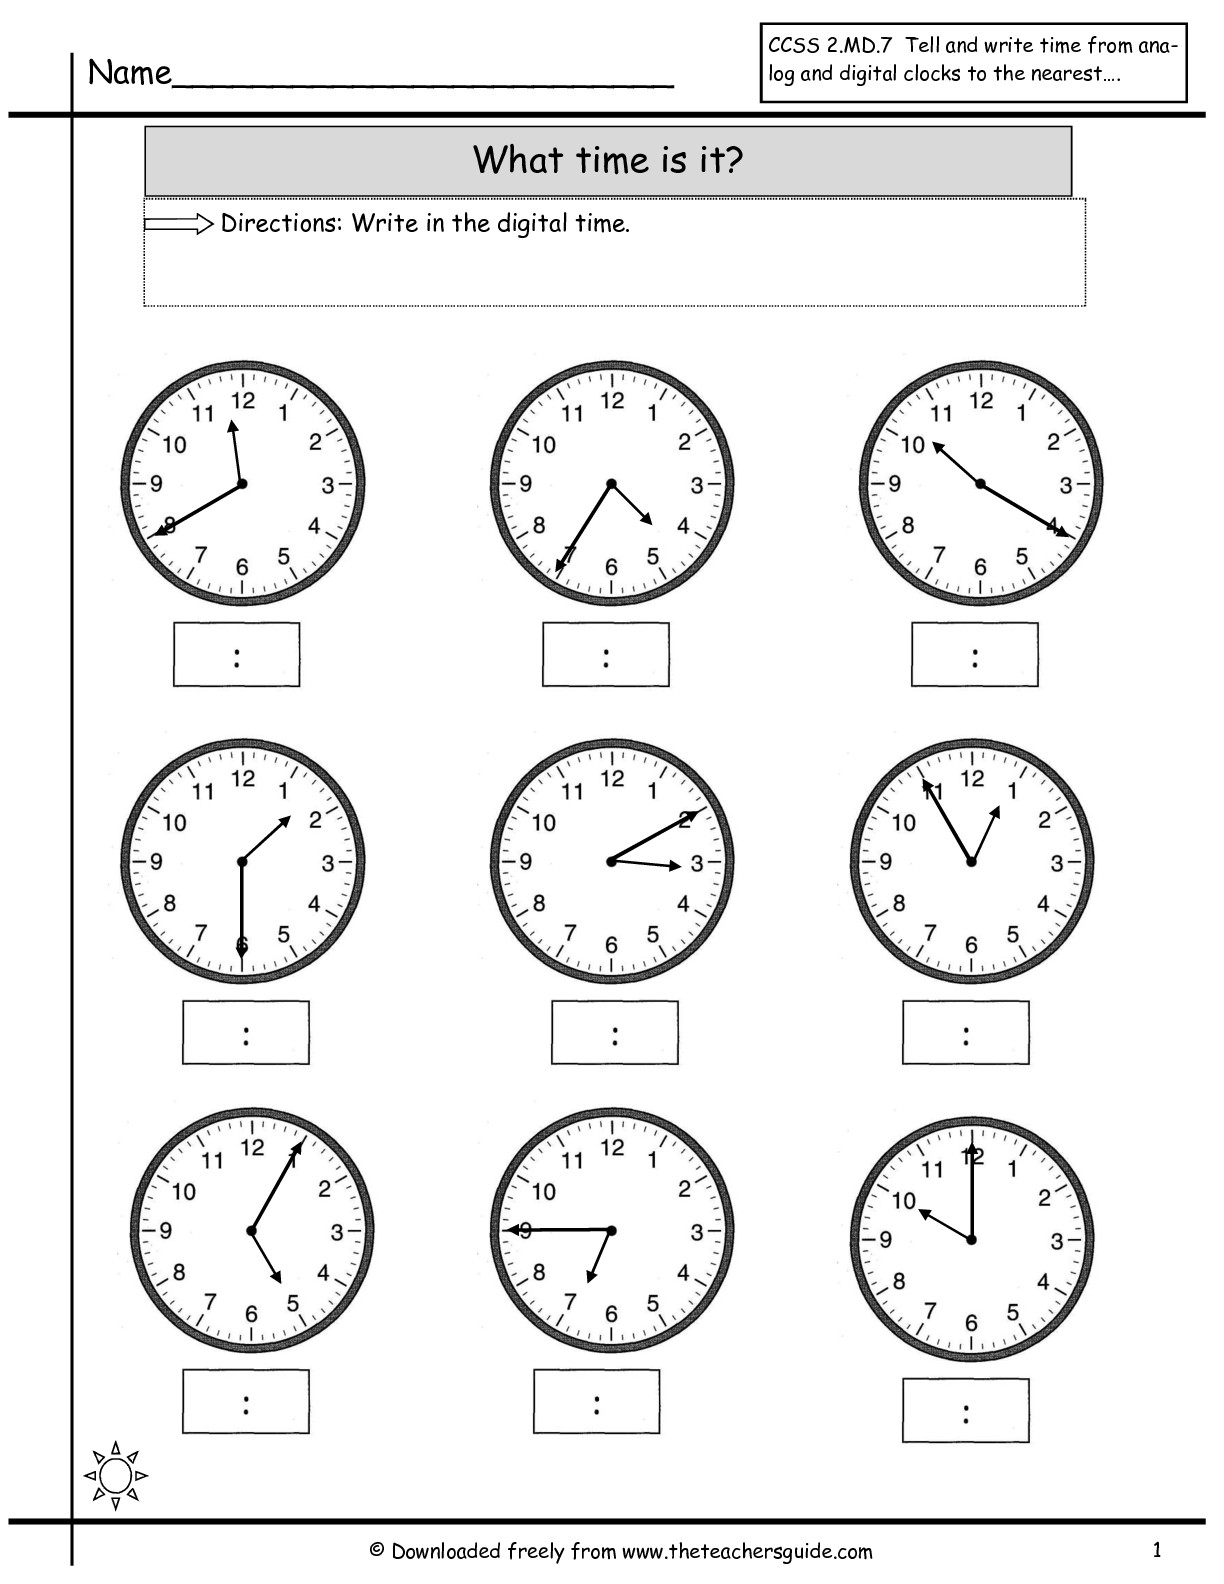 Telling Time Worksheets to Nearest 5 Minutes Image